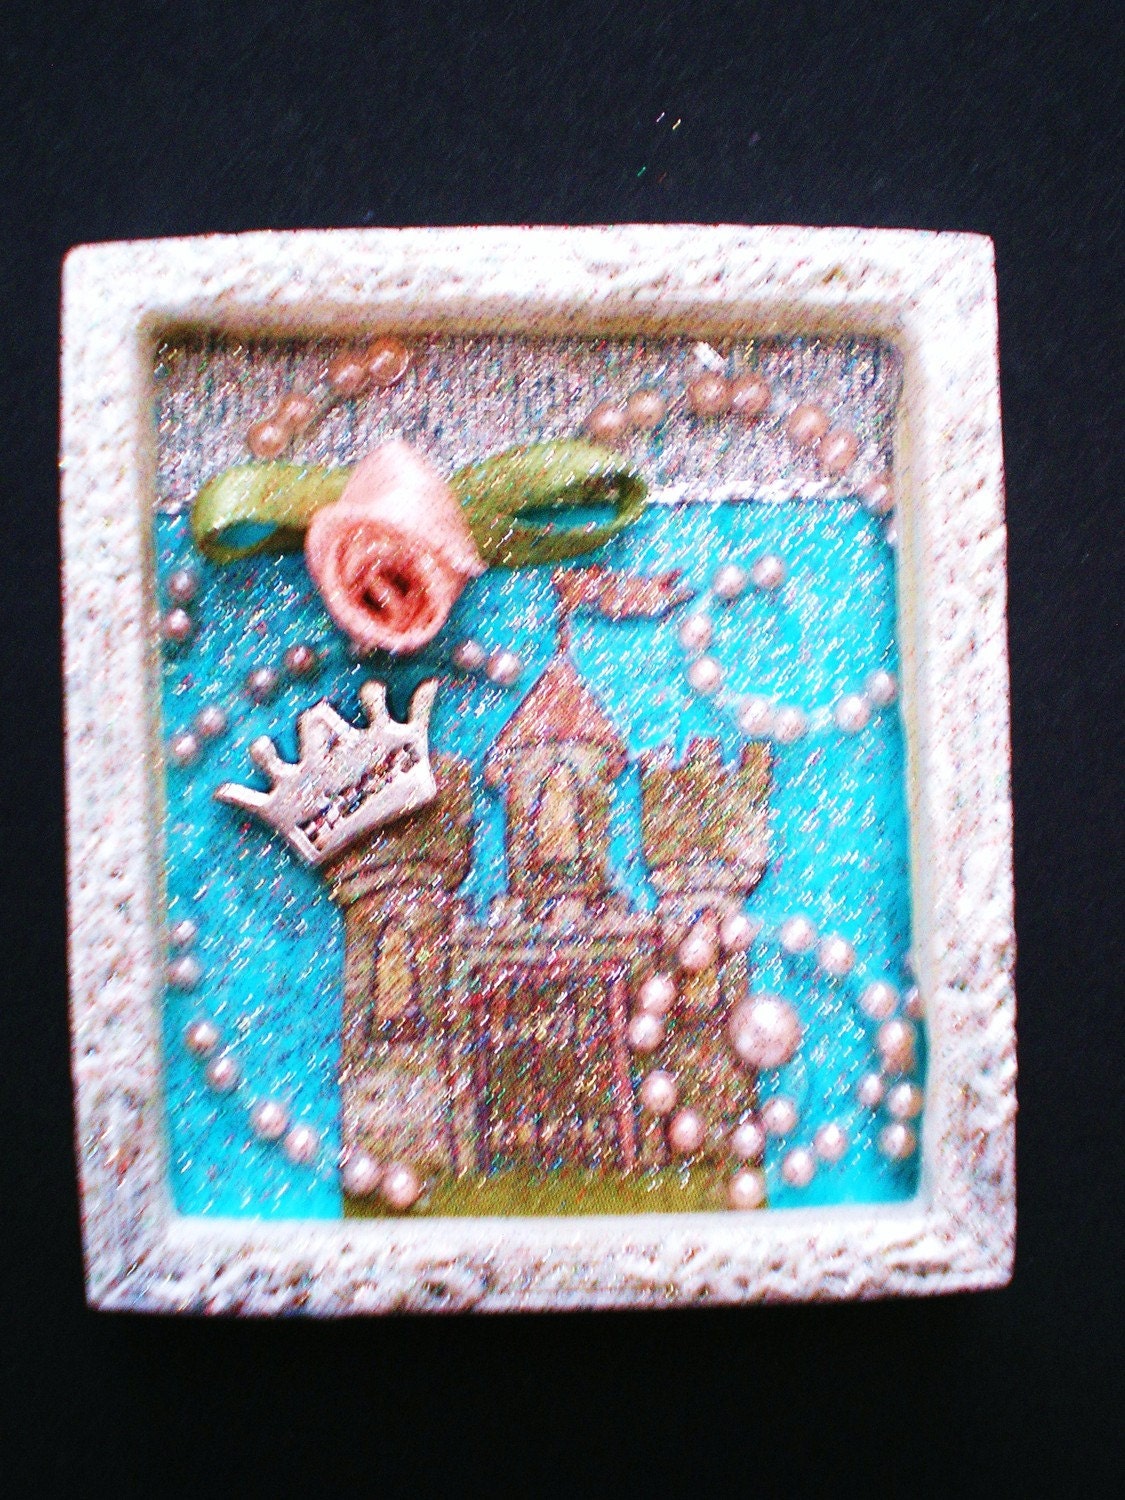 FAIRY TALE  - Tiny Collage Mixed Media OOAK Framed Signed with Pink Pearly Beads Silver Ribbon Princess Charm Satin Flower Castle